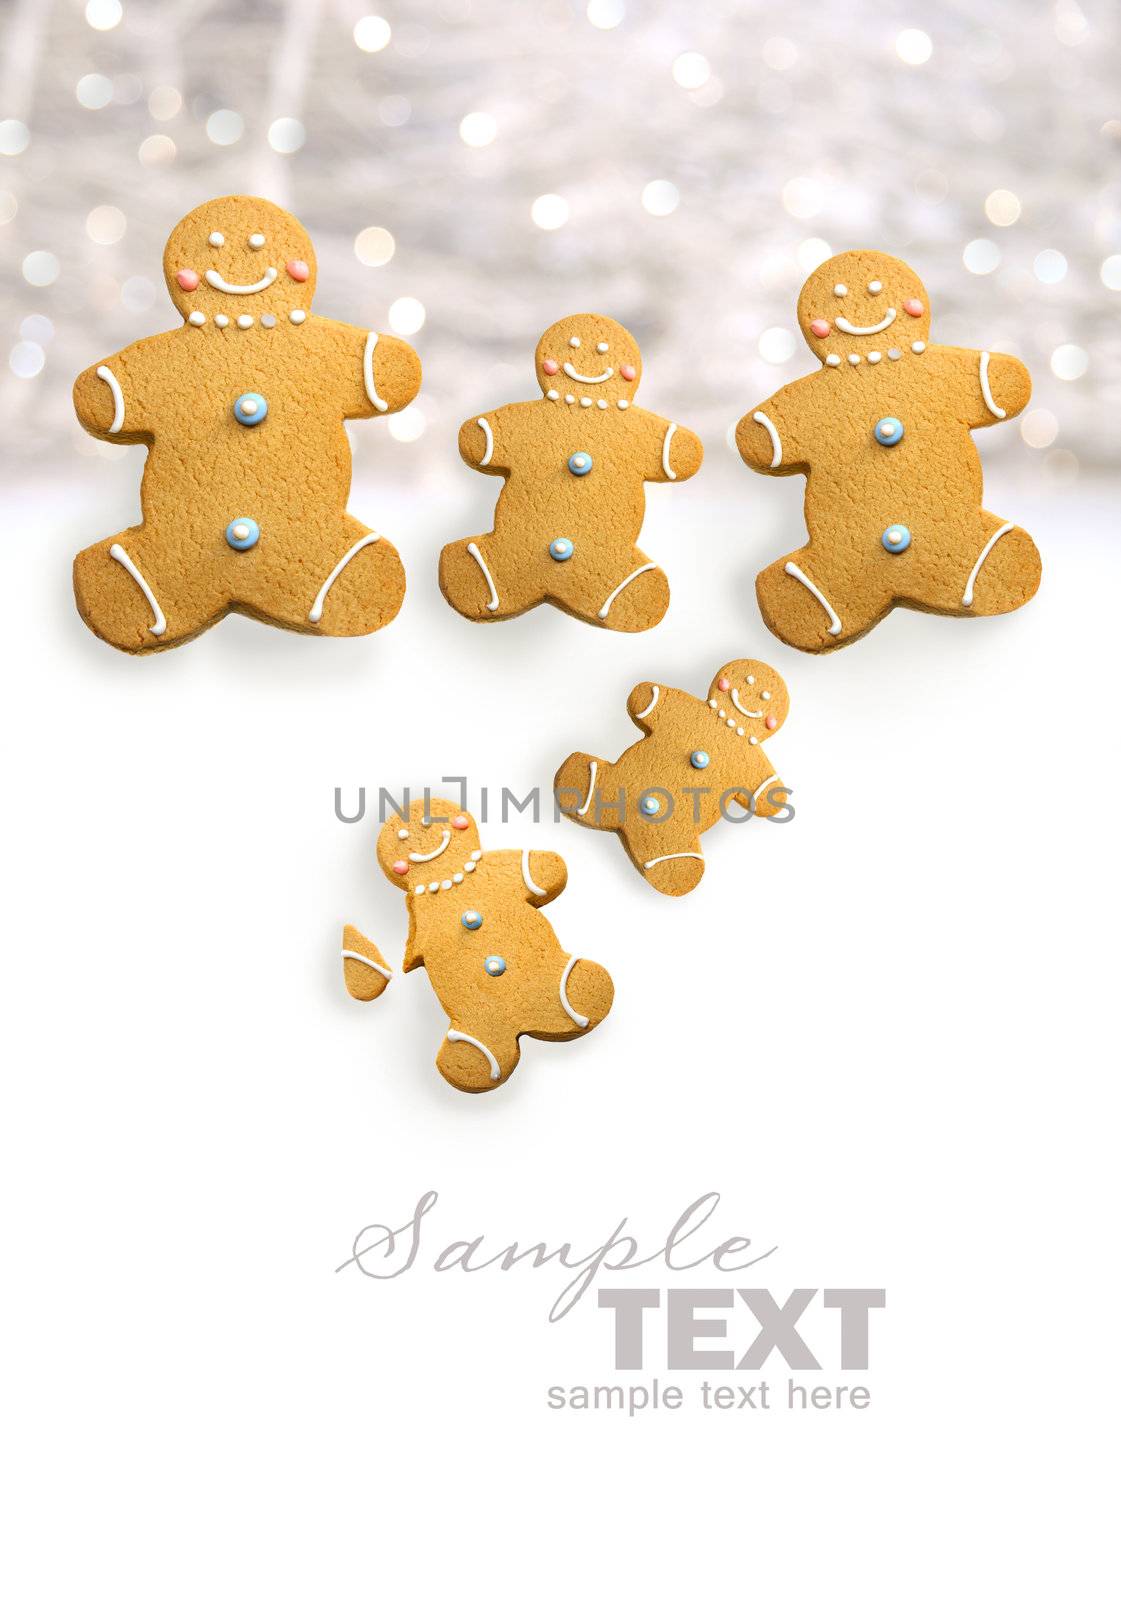 Gingerbread men cookies against sparkly white  by Sandralise